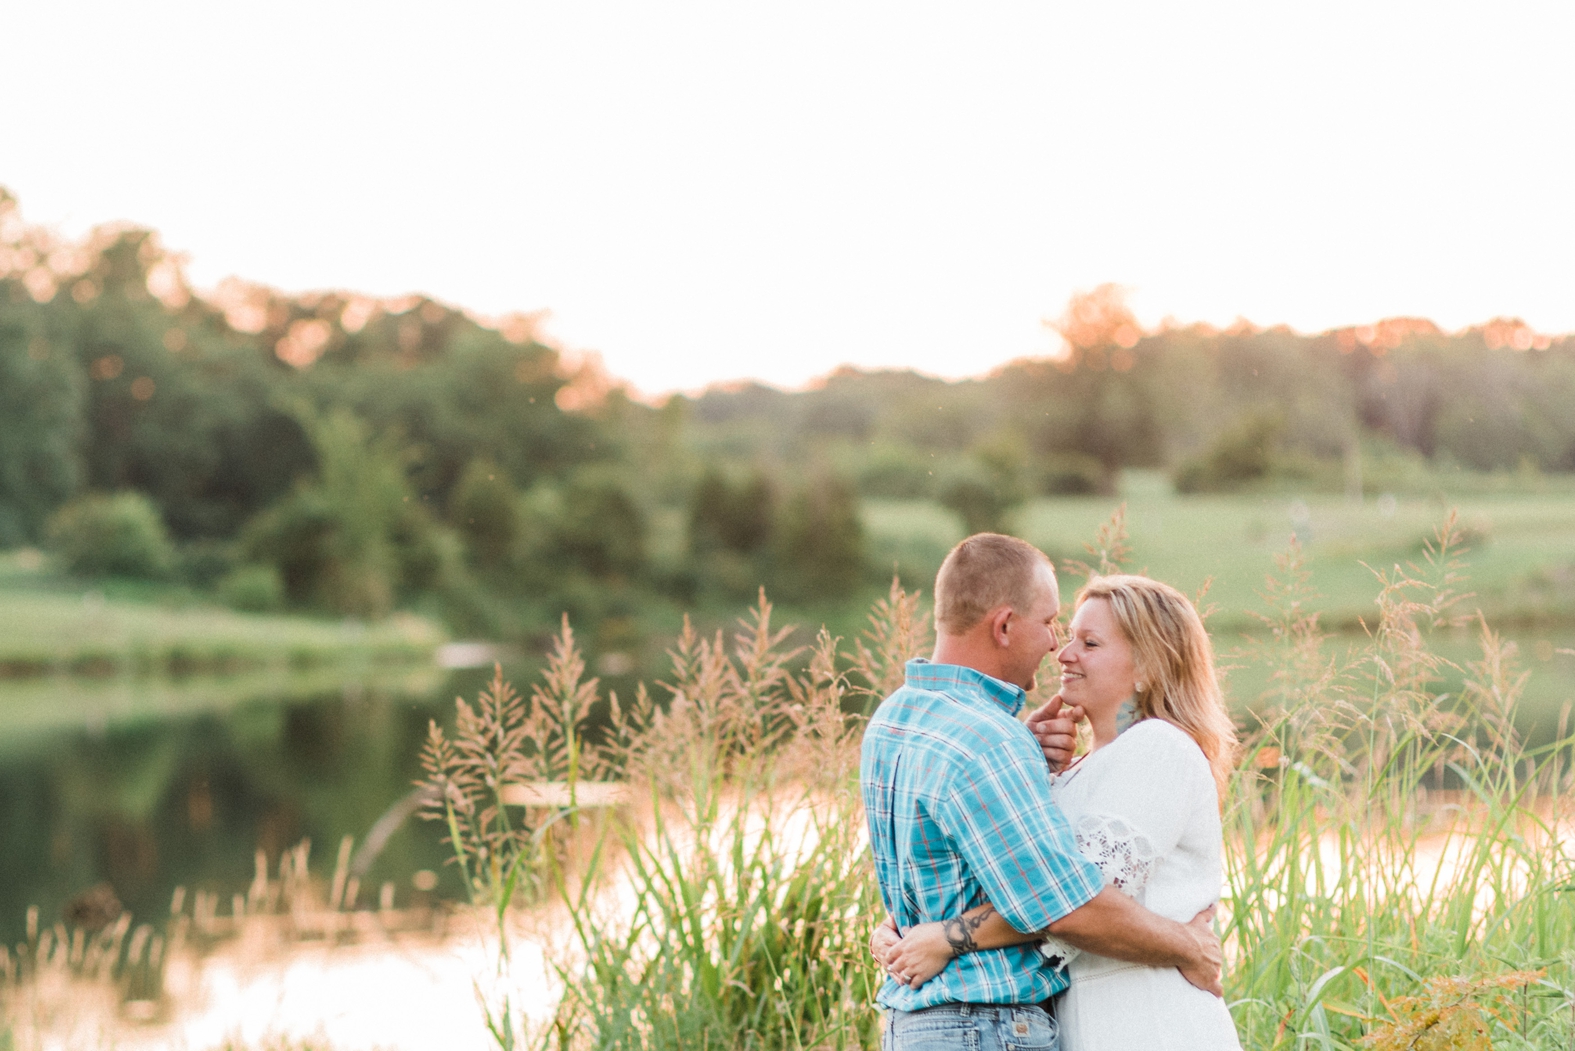 Bride and groom embrace closely for their engagement photos at Broemmelsiek Park in St. Charles, MO near the beautiful water.